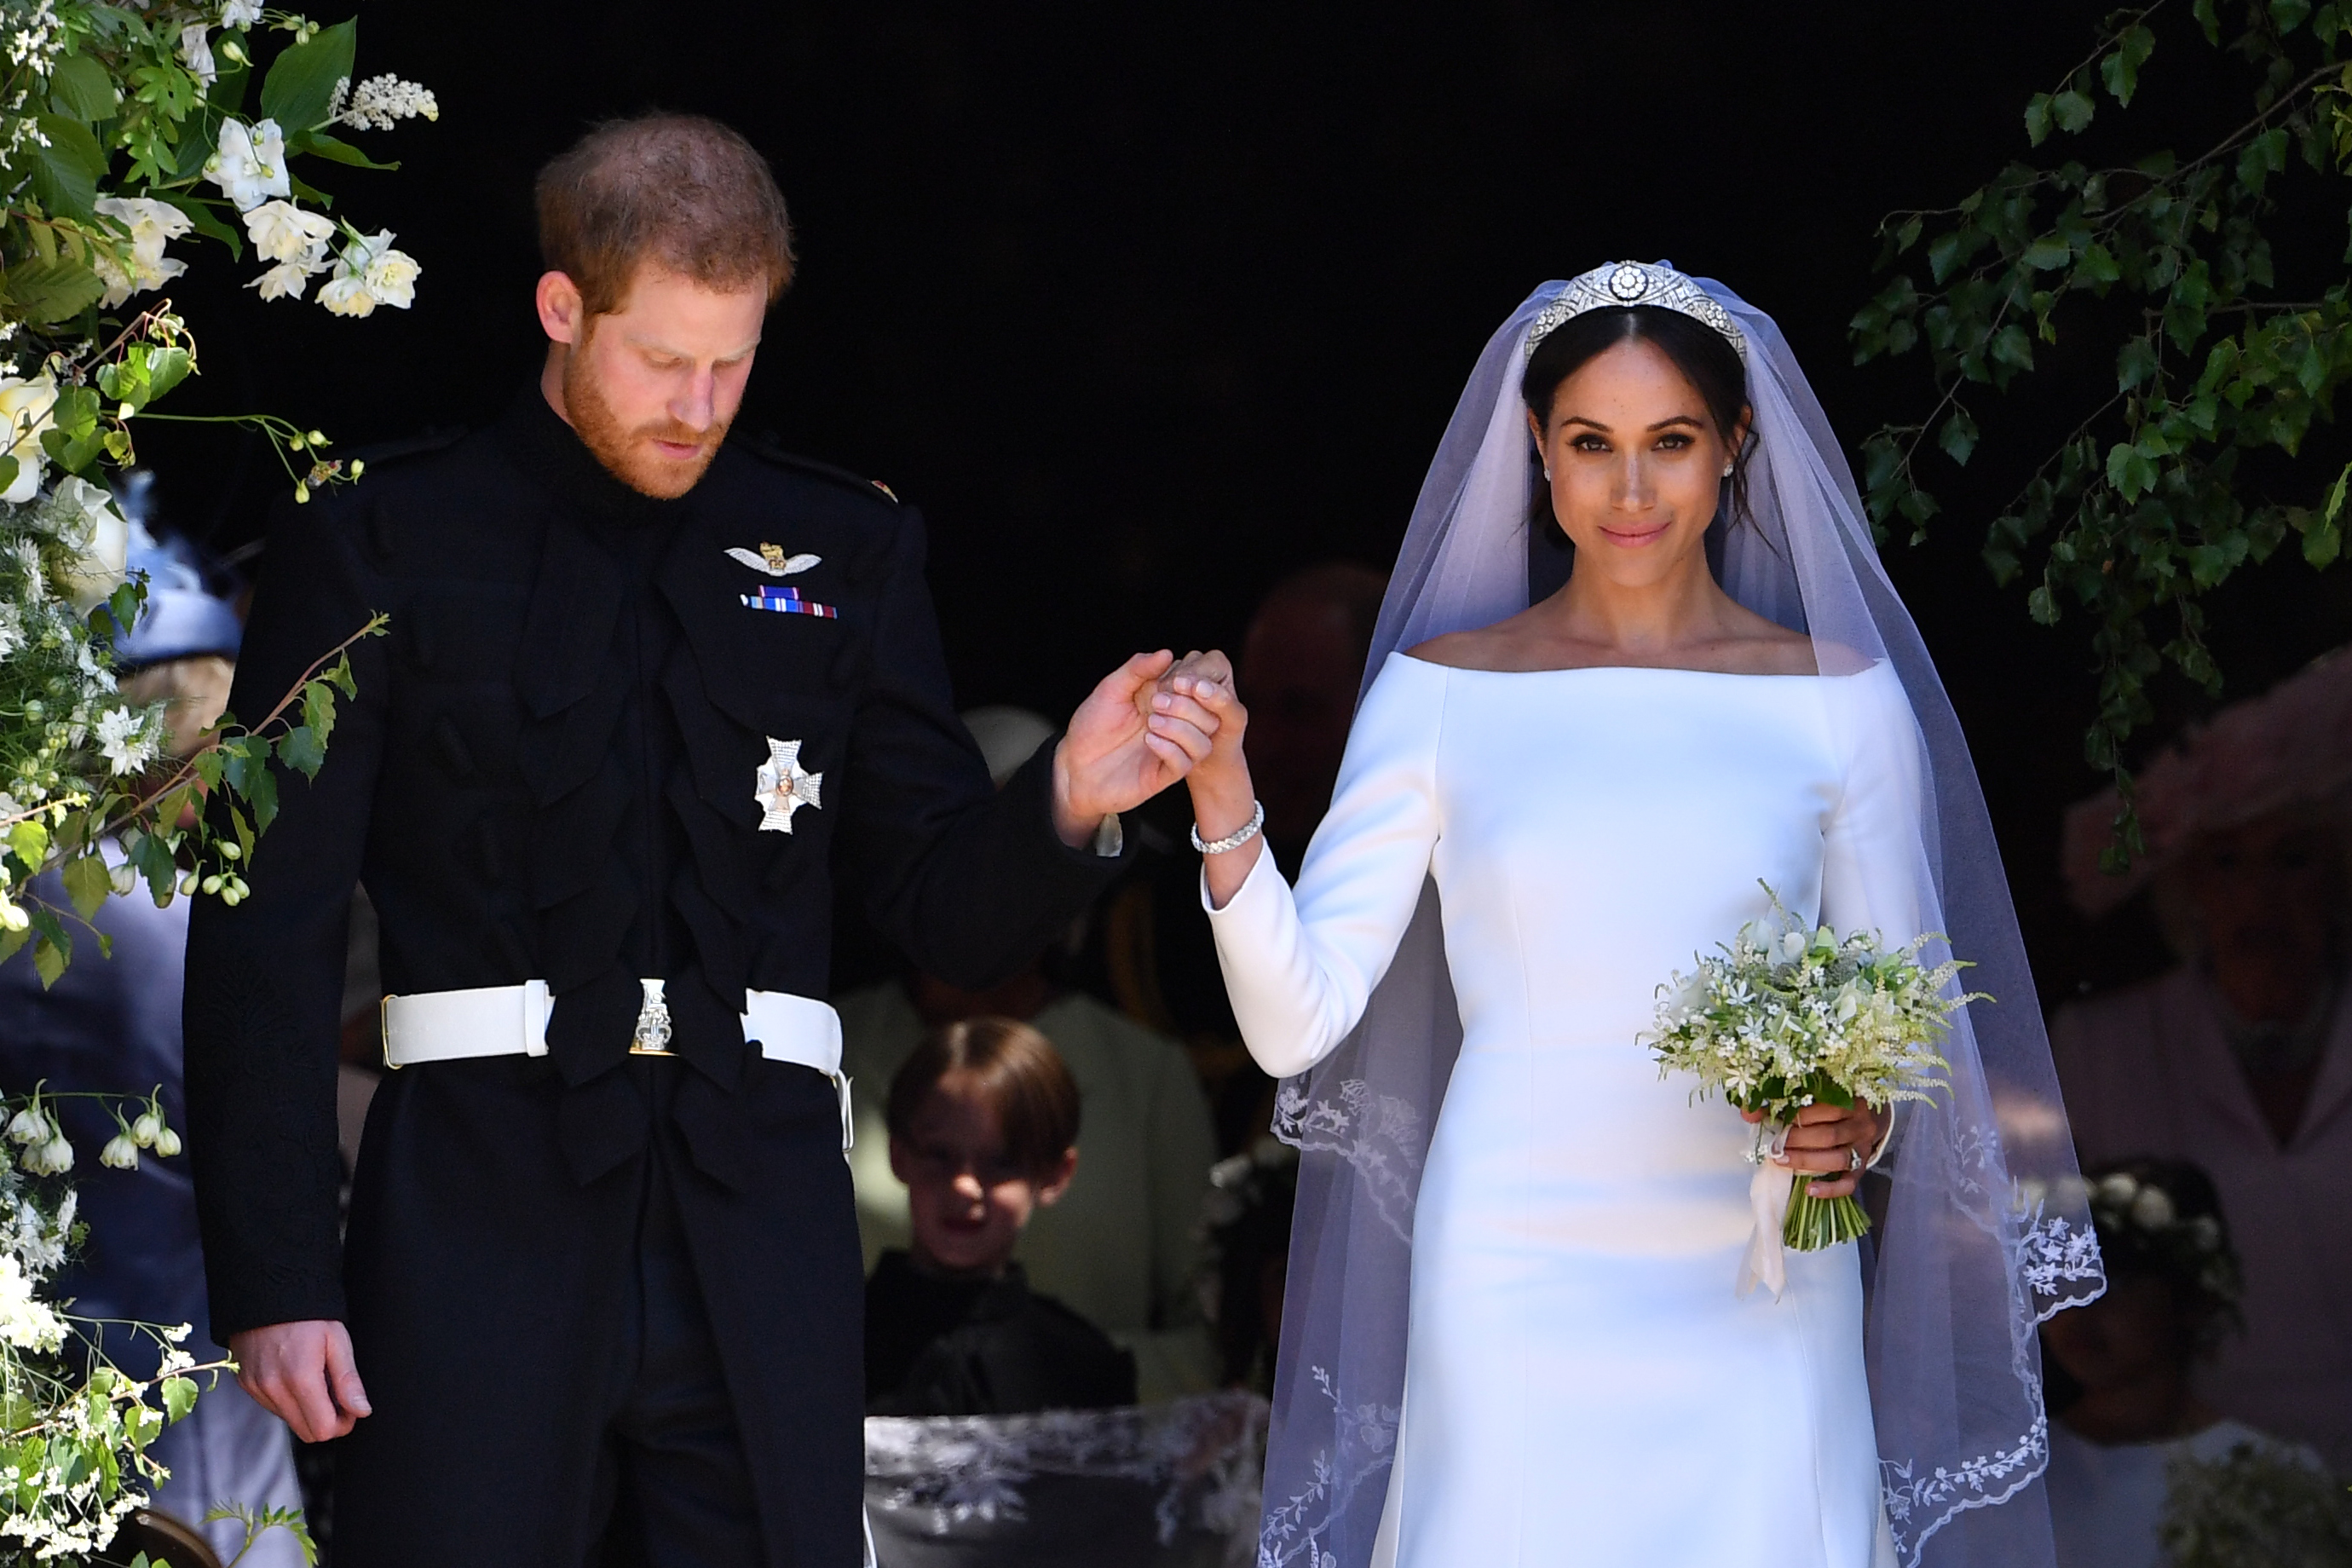 Prince Harry and Meghan Markle leave from the West Door of St George's Chapel on their wedding day